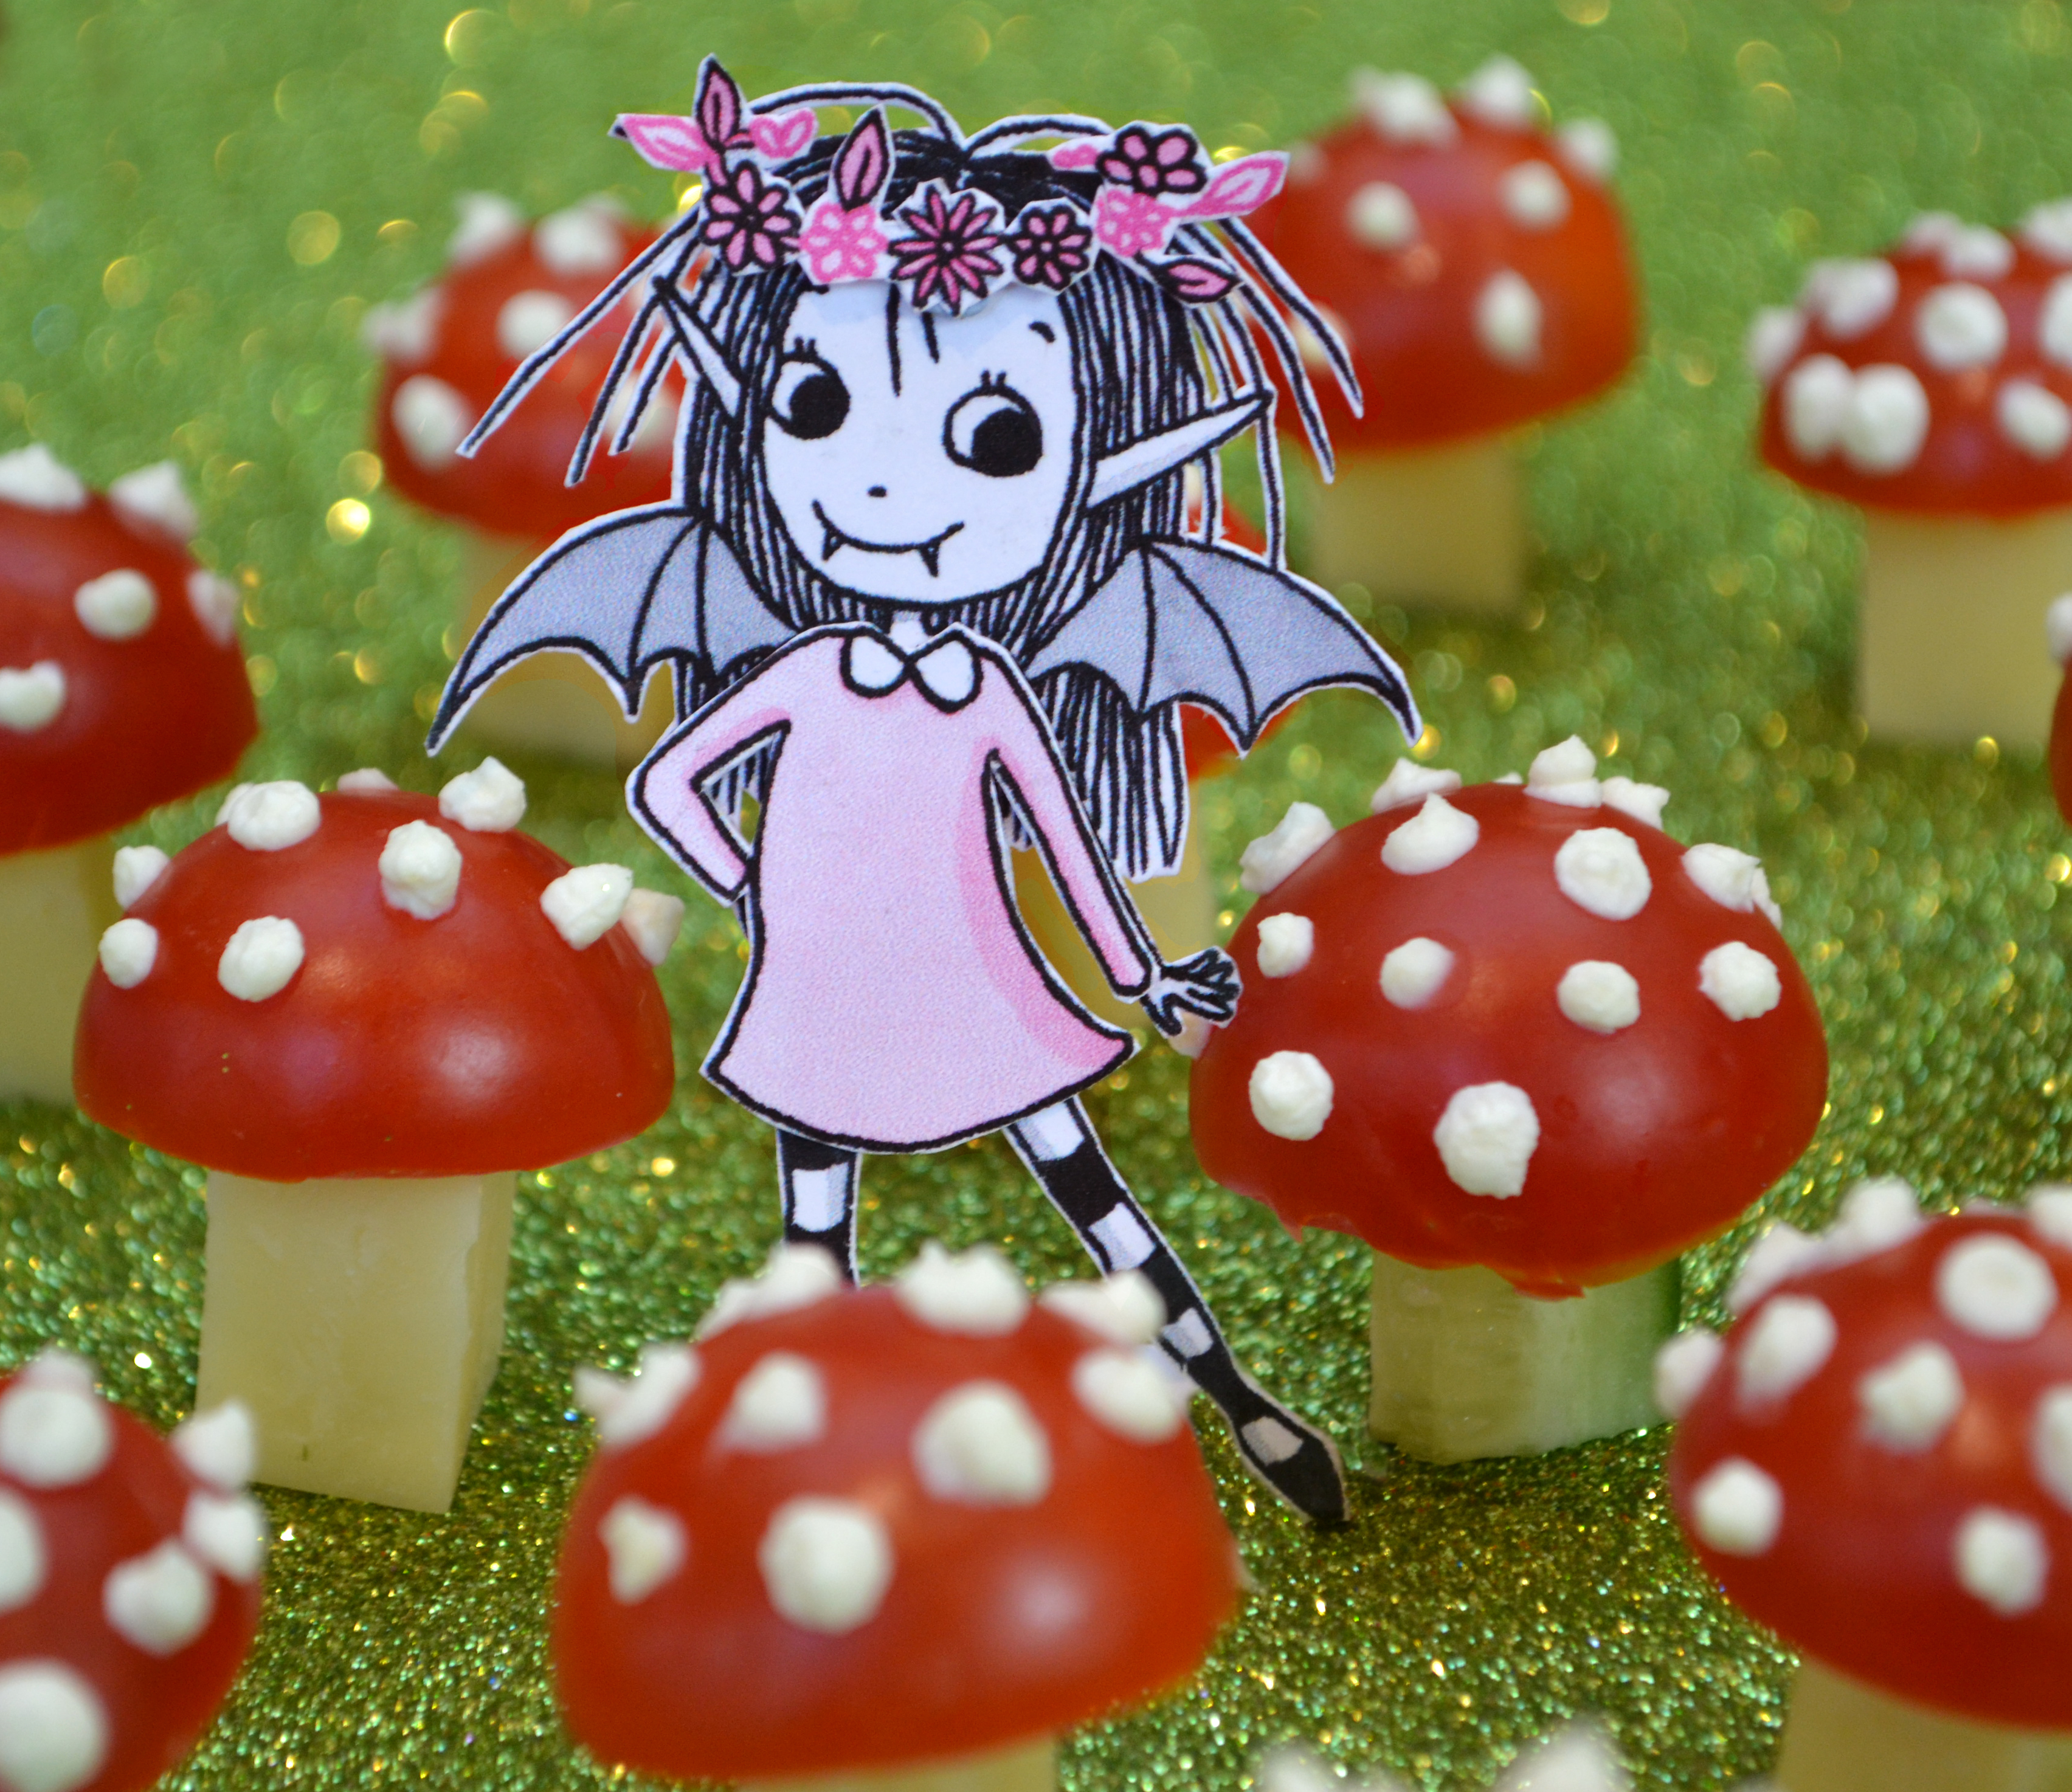 Isadora Moon posing with tomato and cheese toadstools